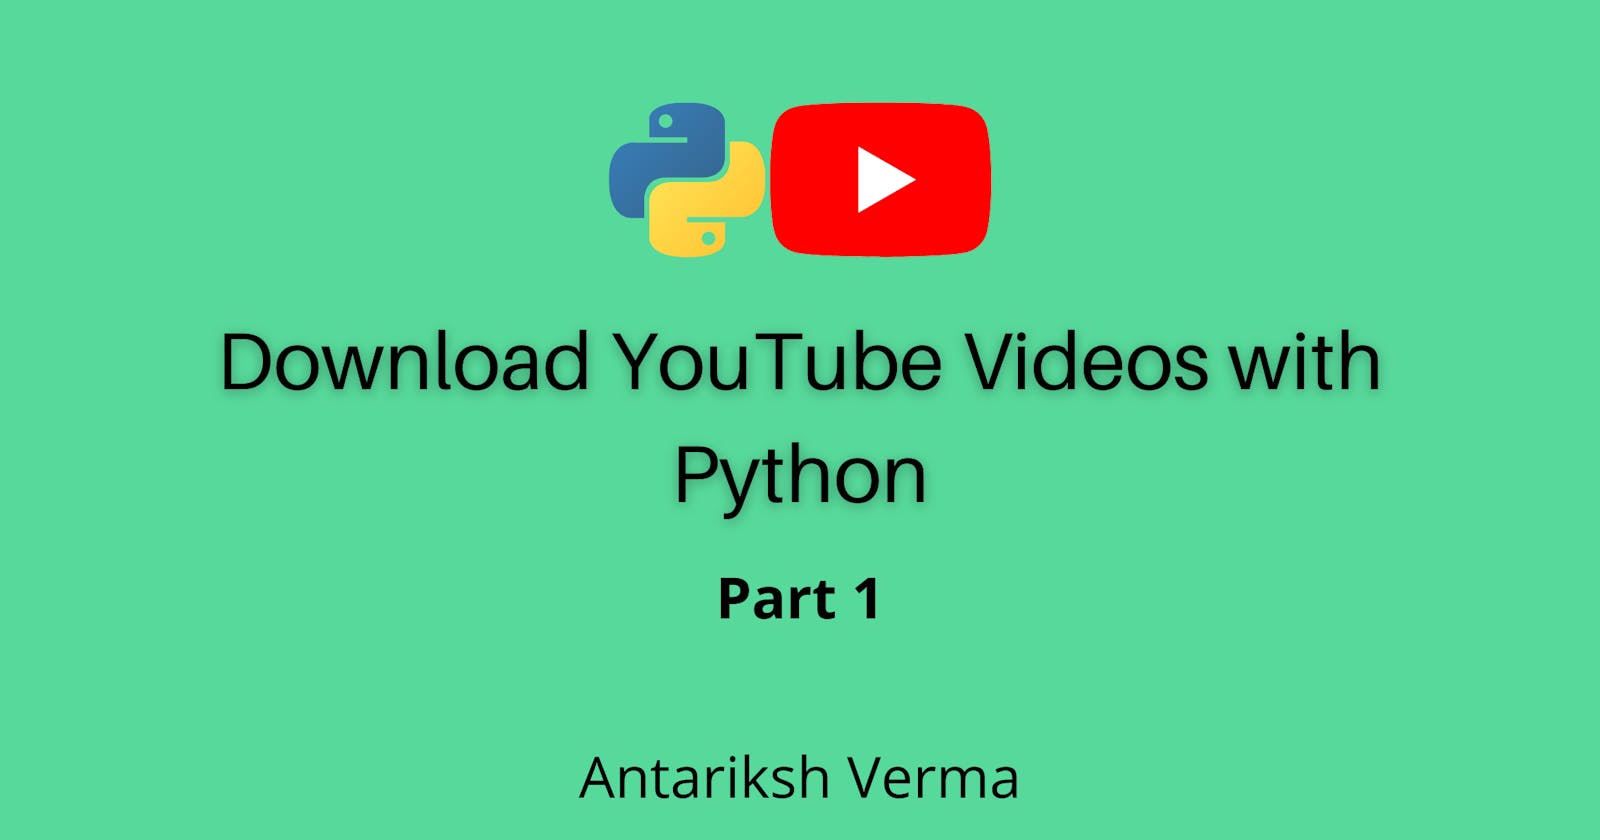 Download YouTube Videos with Python - Part 1